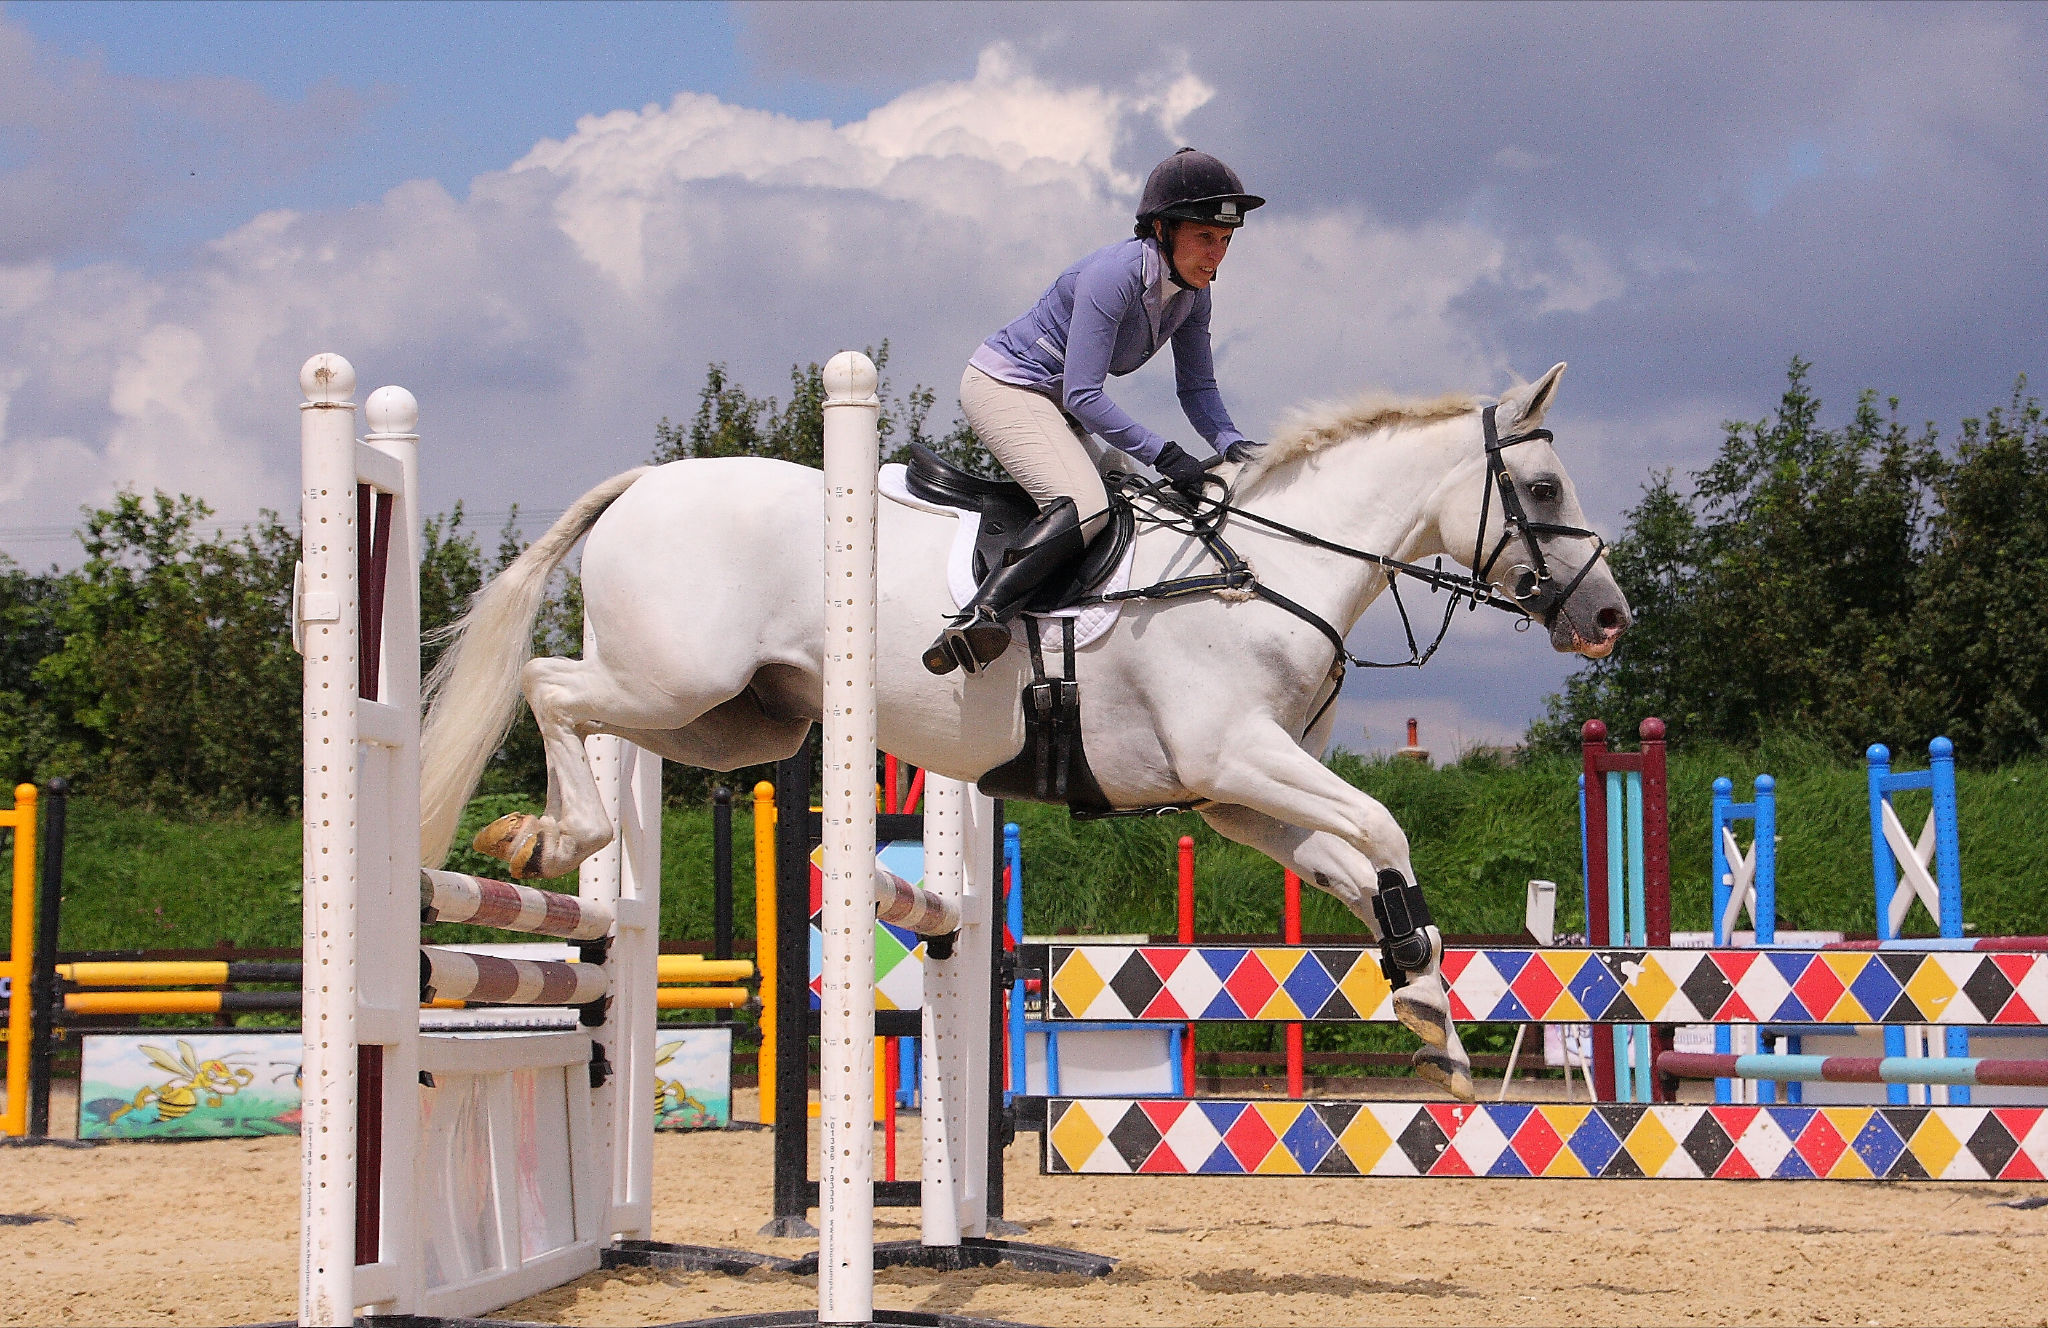 HQ Show Jumping Wallpapers | File 728.41Kb